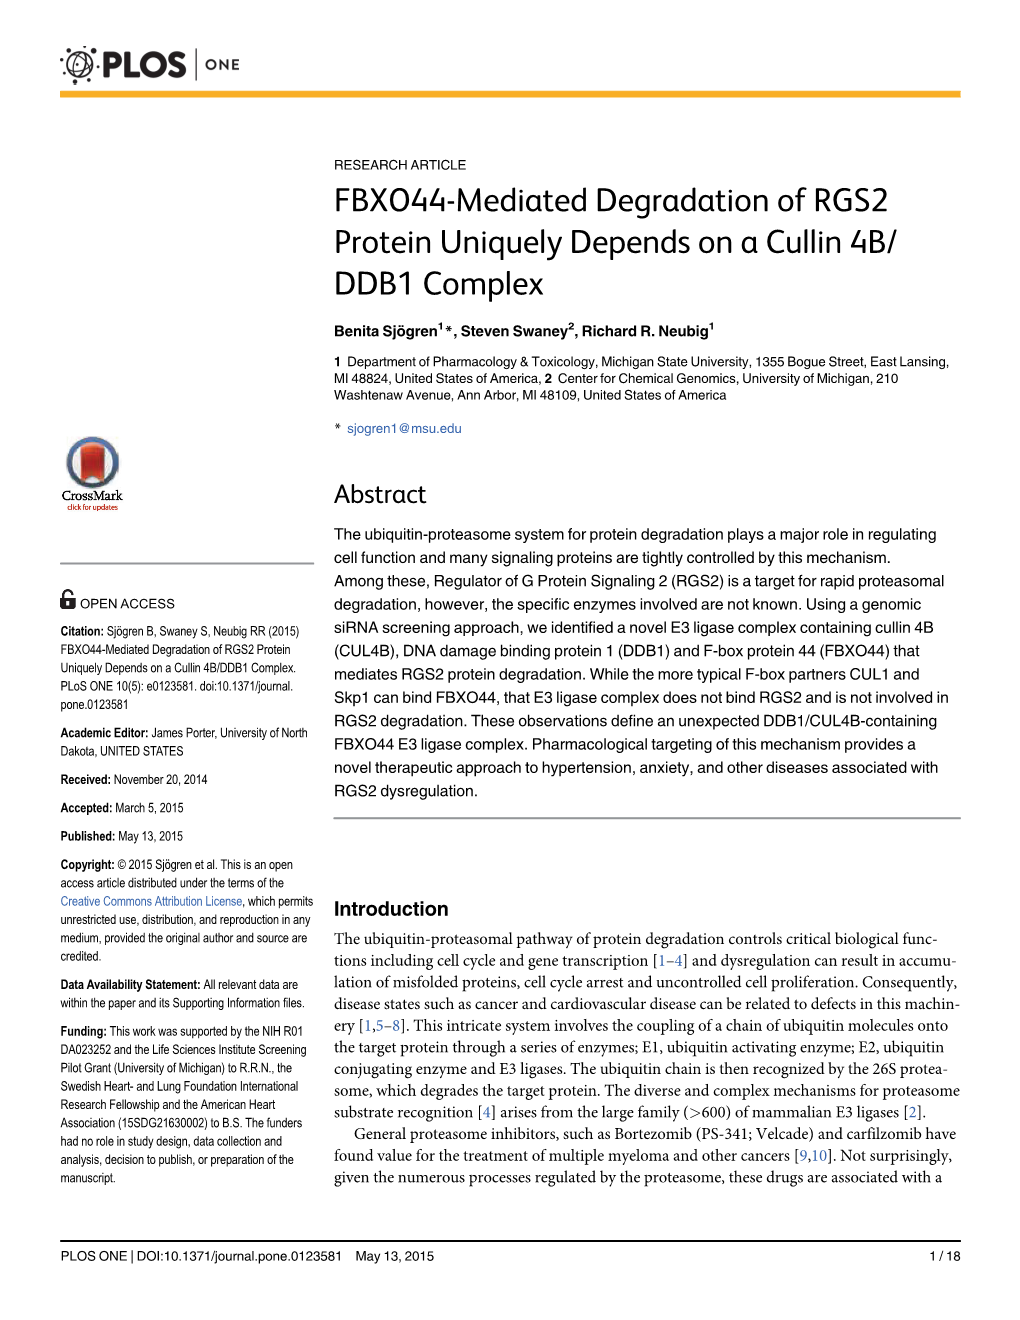 FBXO44-Mediated Degradation of RGS2 Protein Uniquely Depends on a Cullin 4B/ DDB1 Complex